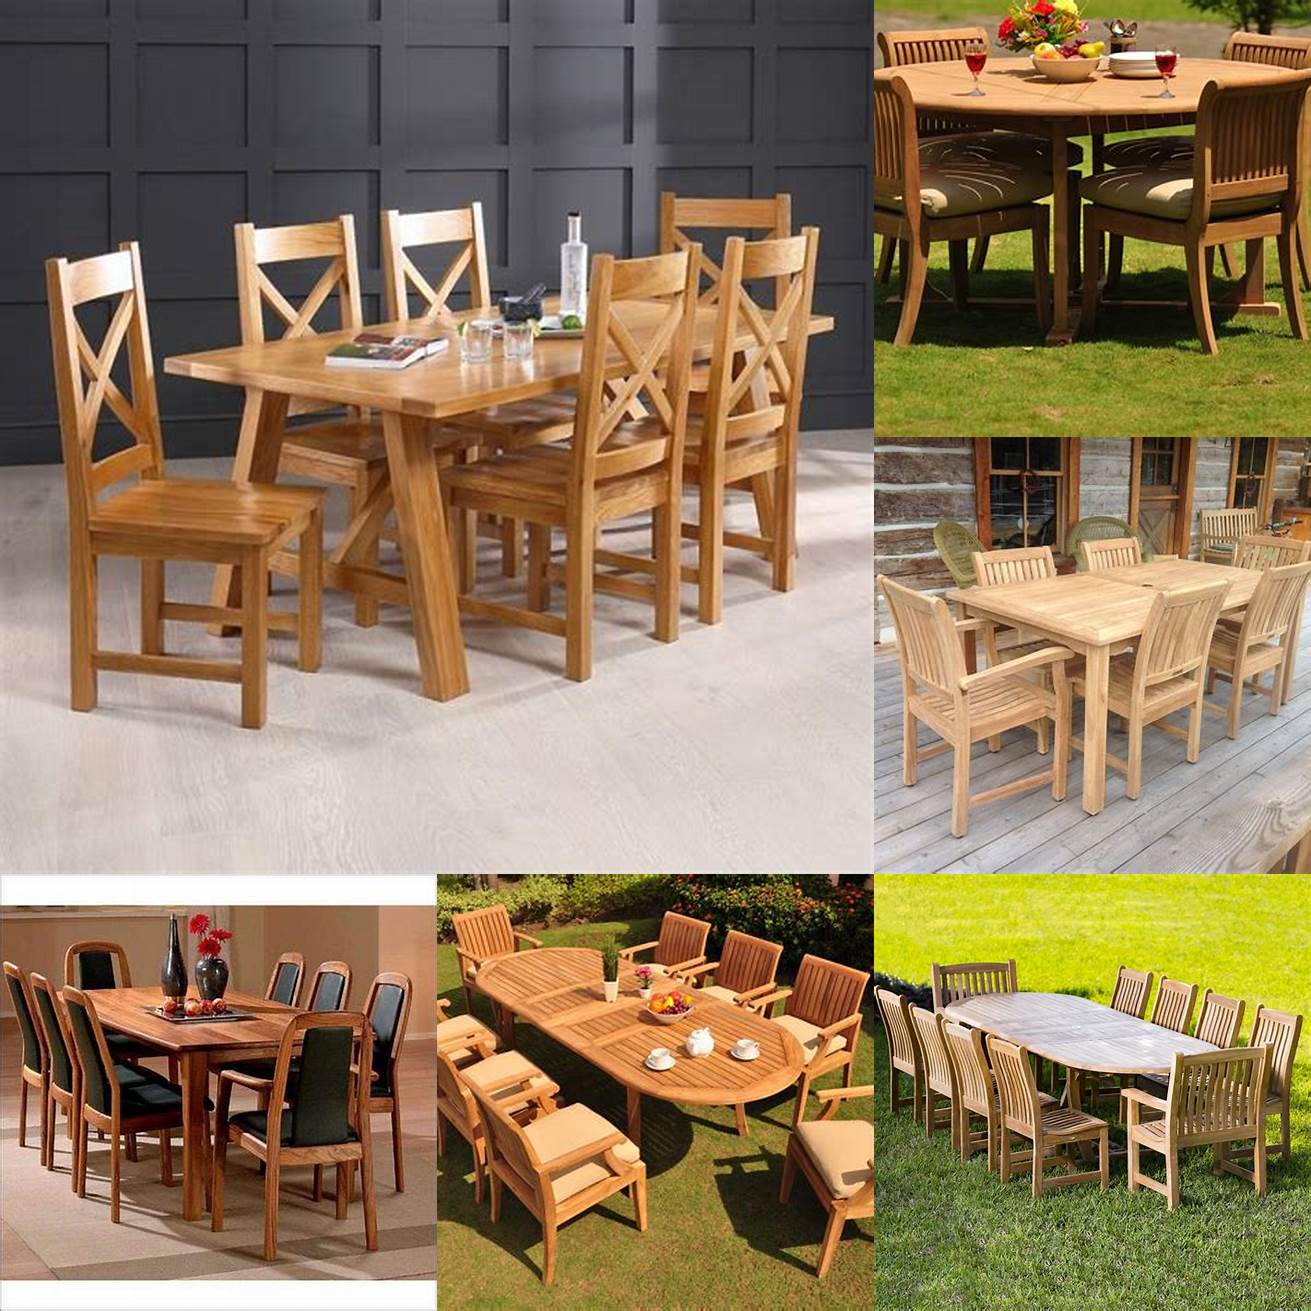 Comparison of Different Teak Wood Dining Tables